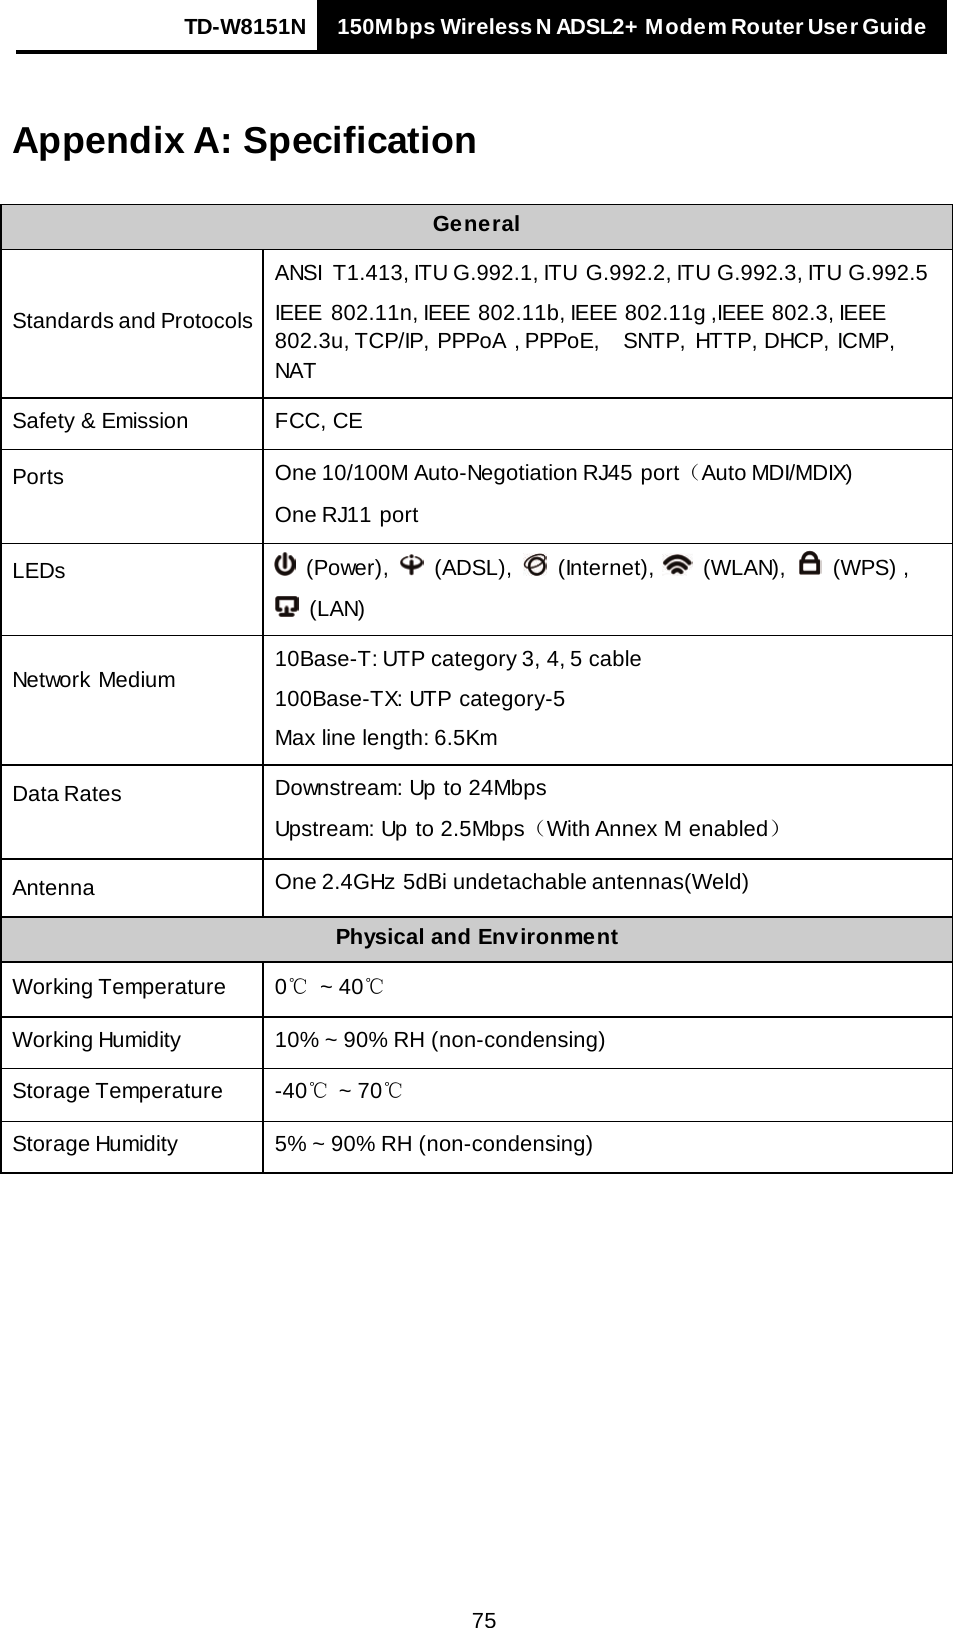 TD-W8151N 150Mbps Wireless N ADSL2+ Modem Router User Guide   75 Appendix A: Specification General Standards and Protocols ANSI T1.413, ITU G.992.1, ITU G.992.2, ITU G.992.3, ITU G.992.5 IEEE 802.11n, IEEE 802.11b, IEEE 802.11g ,IEEE 802.3, IEEE 802.3u, TCP/IP, PPPoA , PPPoE,    SNTP, HTTP, DHCP, ICMP, NAT Safety &amp; Emission FCC, CE Ports One 10/100M Auto-Negotiation RJ45 port（Auto MDI/MDIX) One RJ11 port LEDs    (Power),    (ADSL),    (Internet),    (WLAN),    (WPS) ,  (LAN) Network Medium 10Base-T: UTP category 3, 4, 5 cable 100Base-TX: UTP category-5 Max line length: 6.5Km Data Rates  Downstream: Up to 24Mbps Upstream: Up to 2.5Mbps（With Annex M enabled） Antenna One 2.4GHz  5dBi undetachable antennas(Weld) Physical and Environment Working Temperature  0℃  ~ 40℃ Working Humidity 10% ~ 90% RH (non-condensing) Storage Temperature  -40℃ ~ 70℃ Storage Humidity  5% ~ 90% RH (non-condensing)  